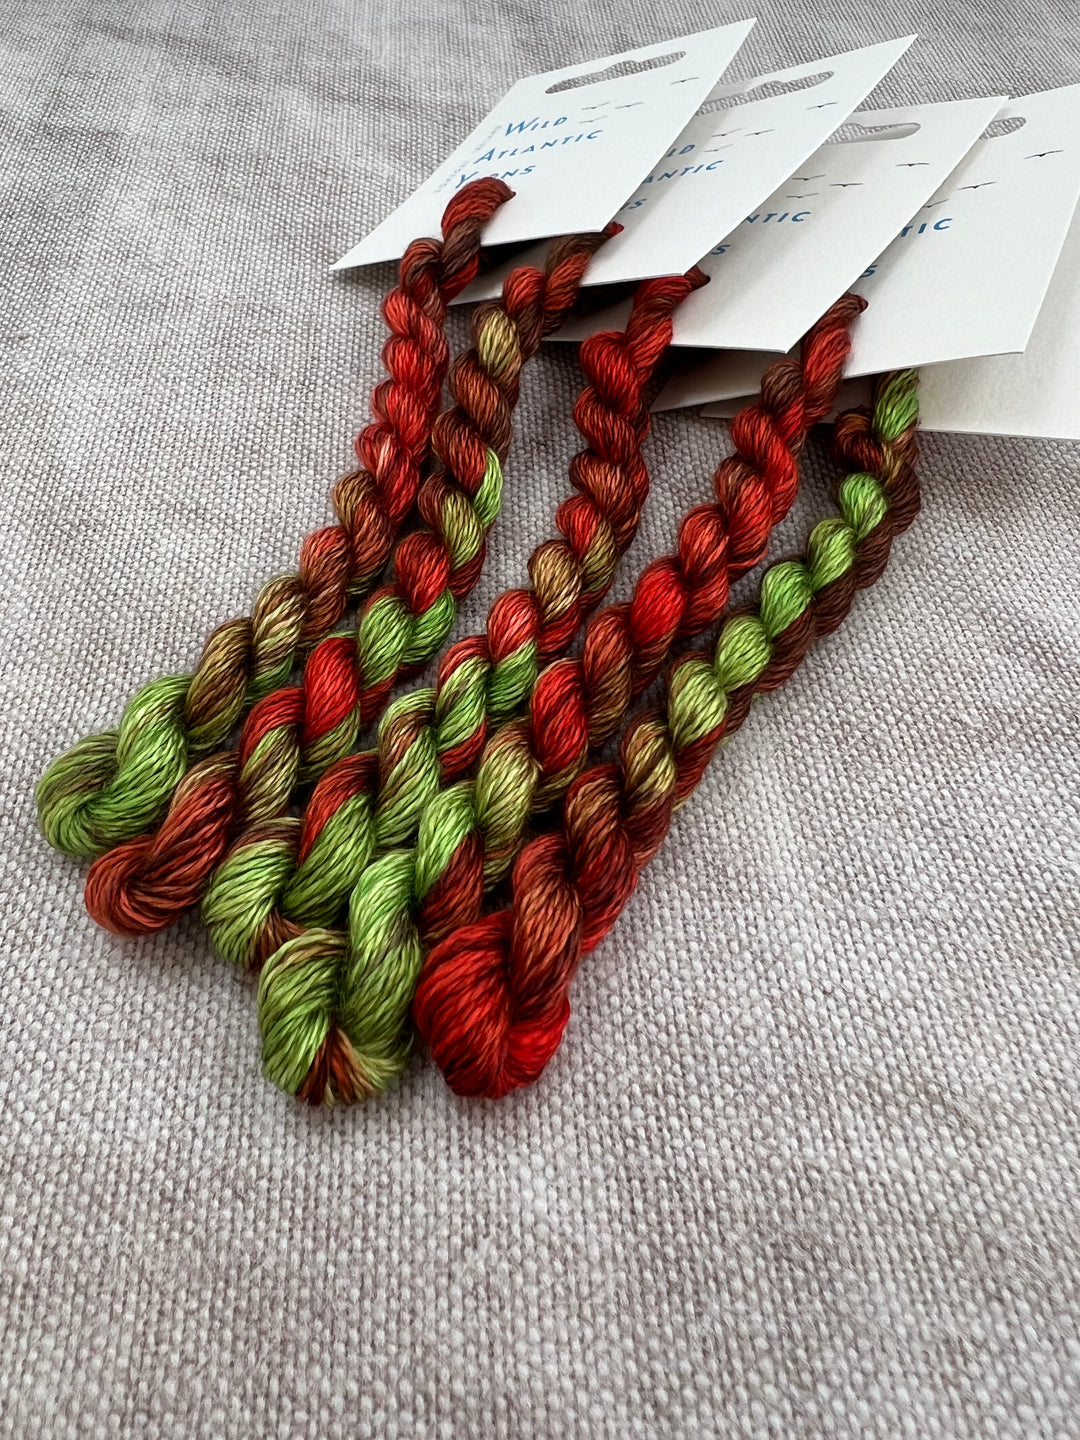 EMBROIDERY THREAD: Toffee Apple